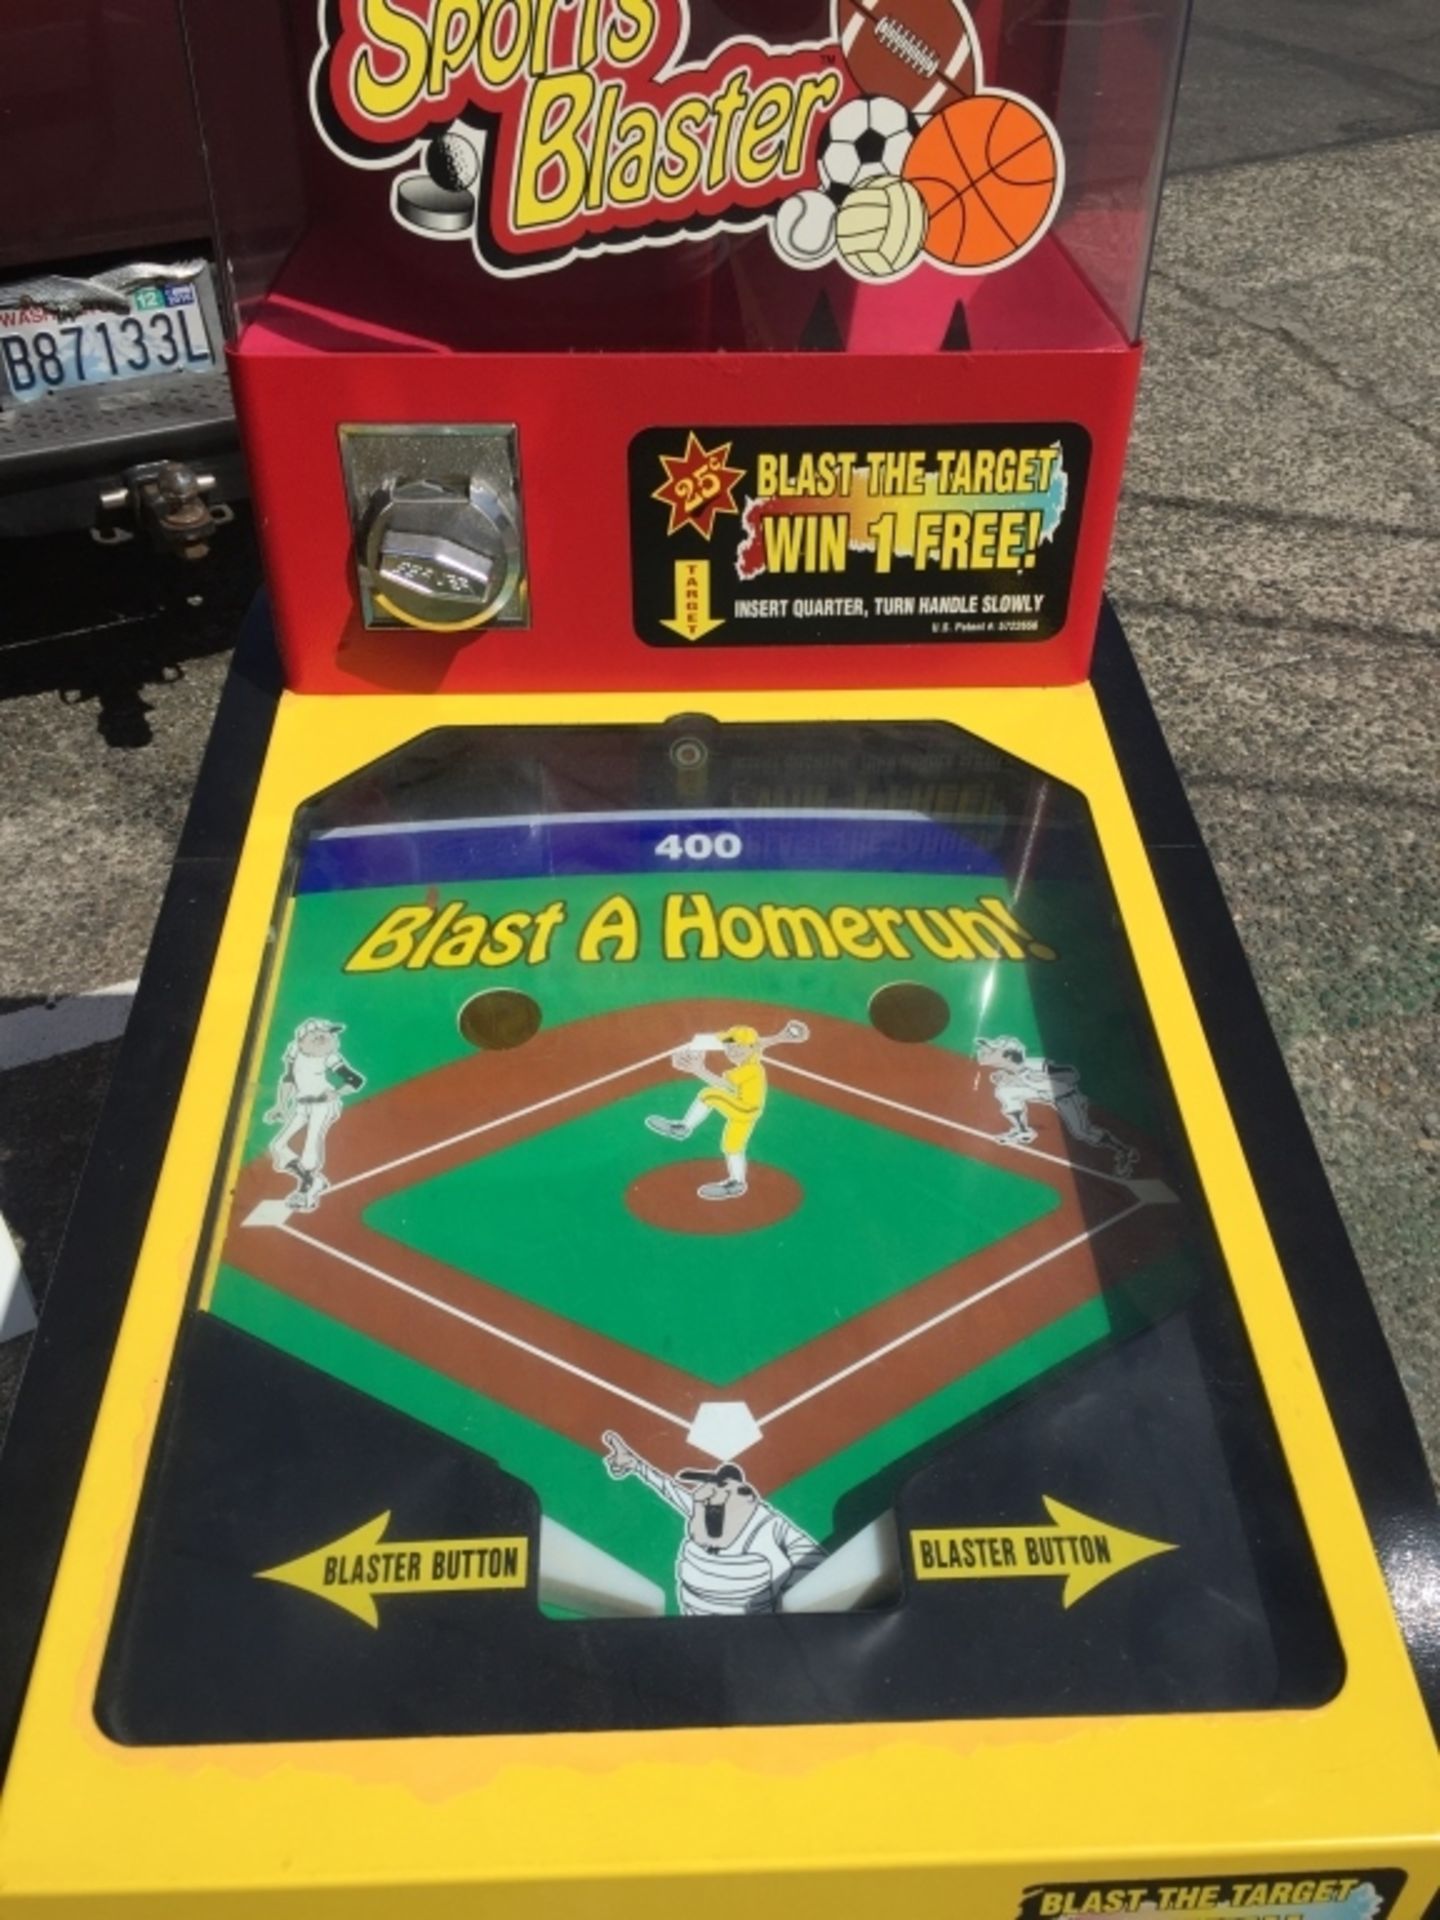 SPORTS BLASTER PRIZE REDEMPTION MULTI PLAYFIELDS - Image 2 of 3